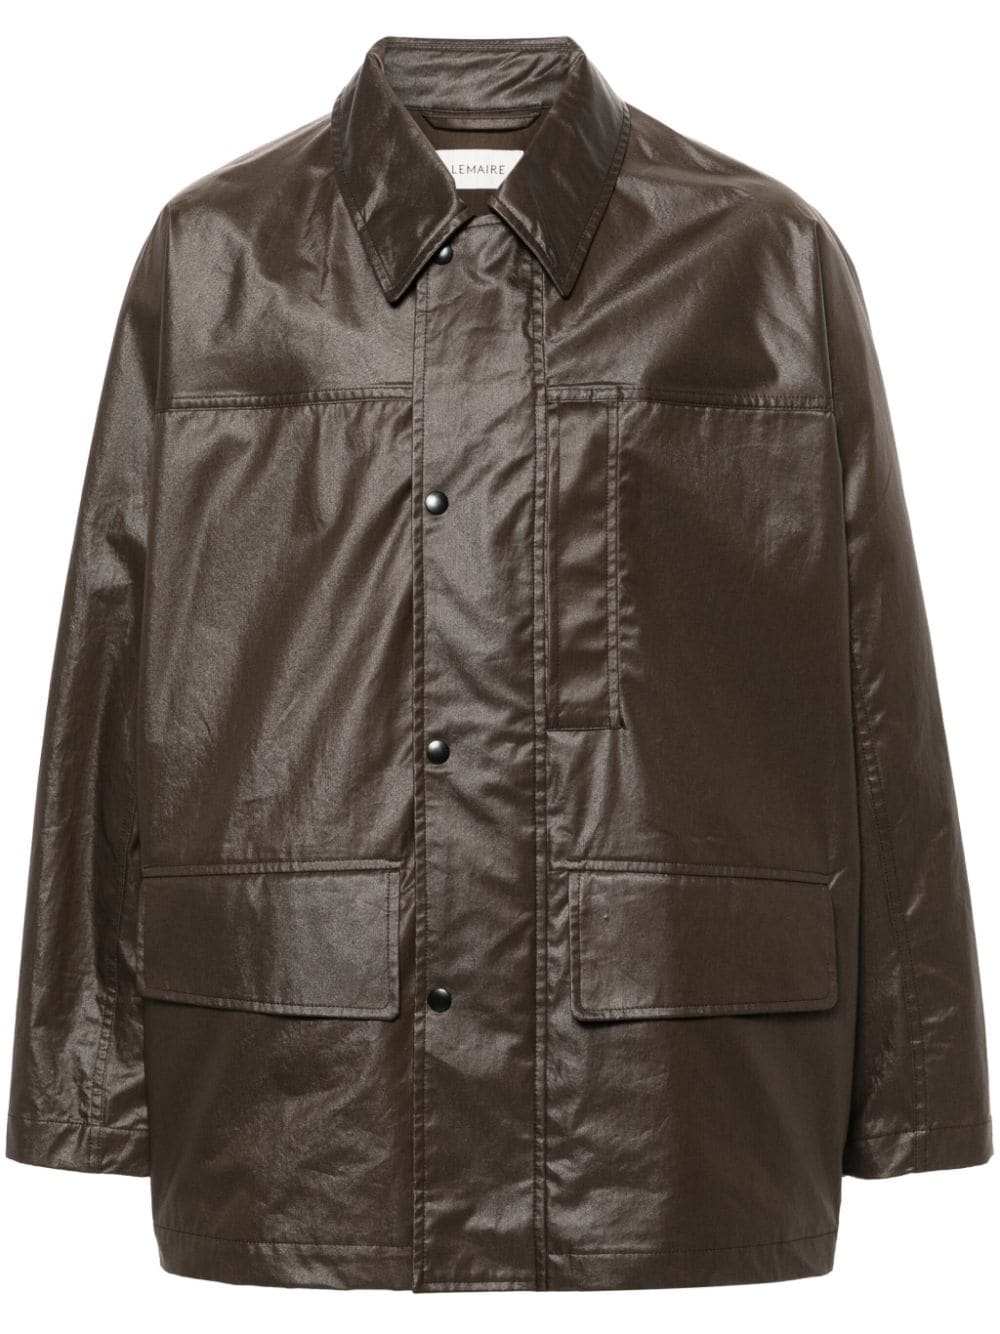 LEMAIRE coated-finish rain jacket - Brown von LEMAIRE